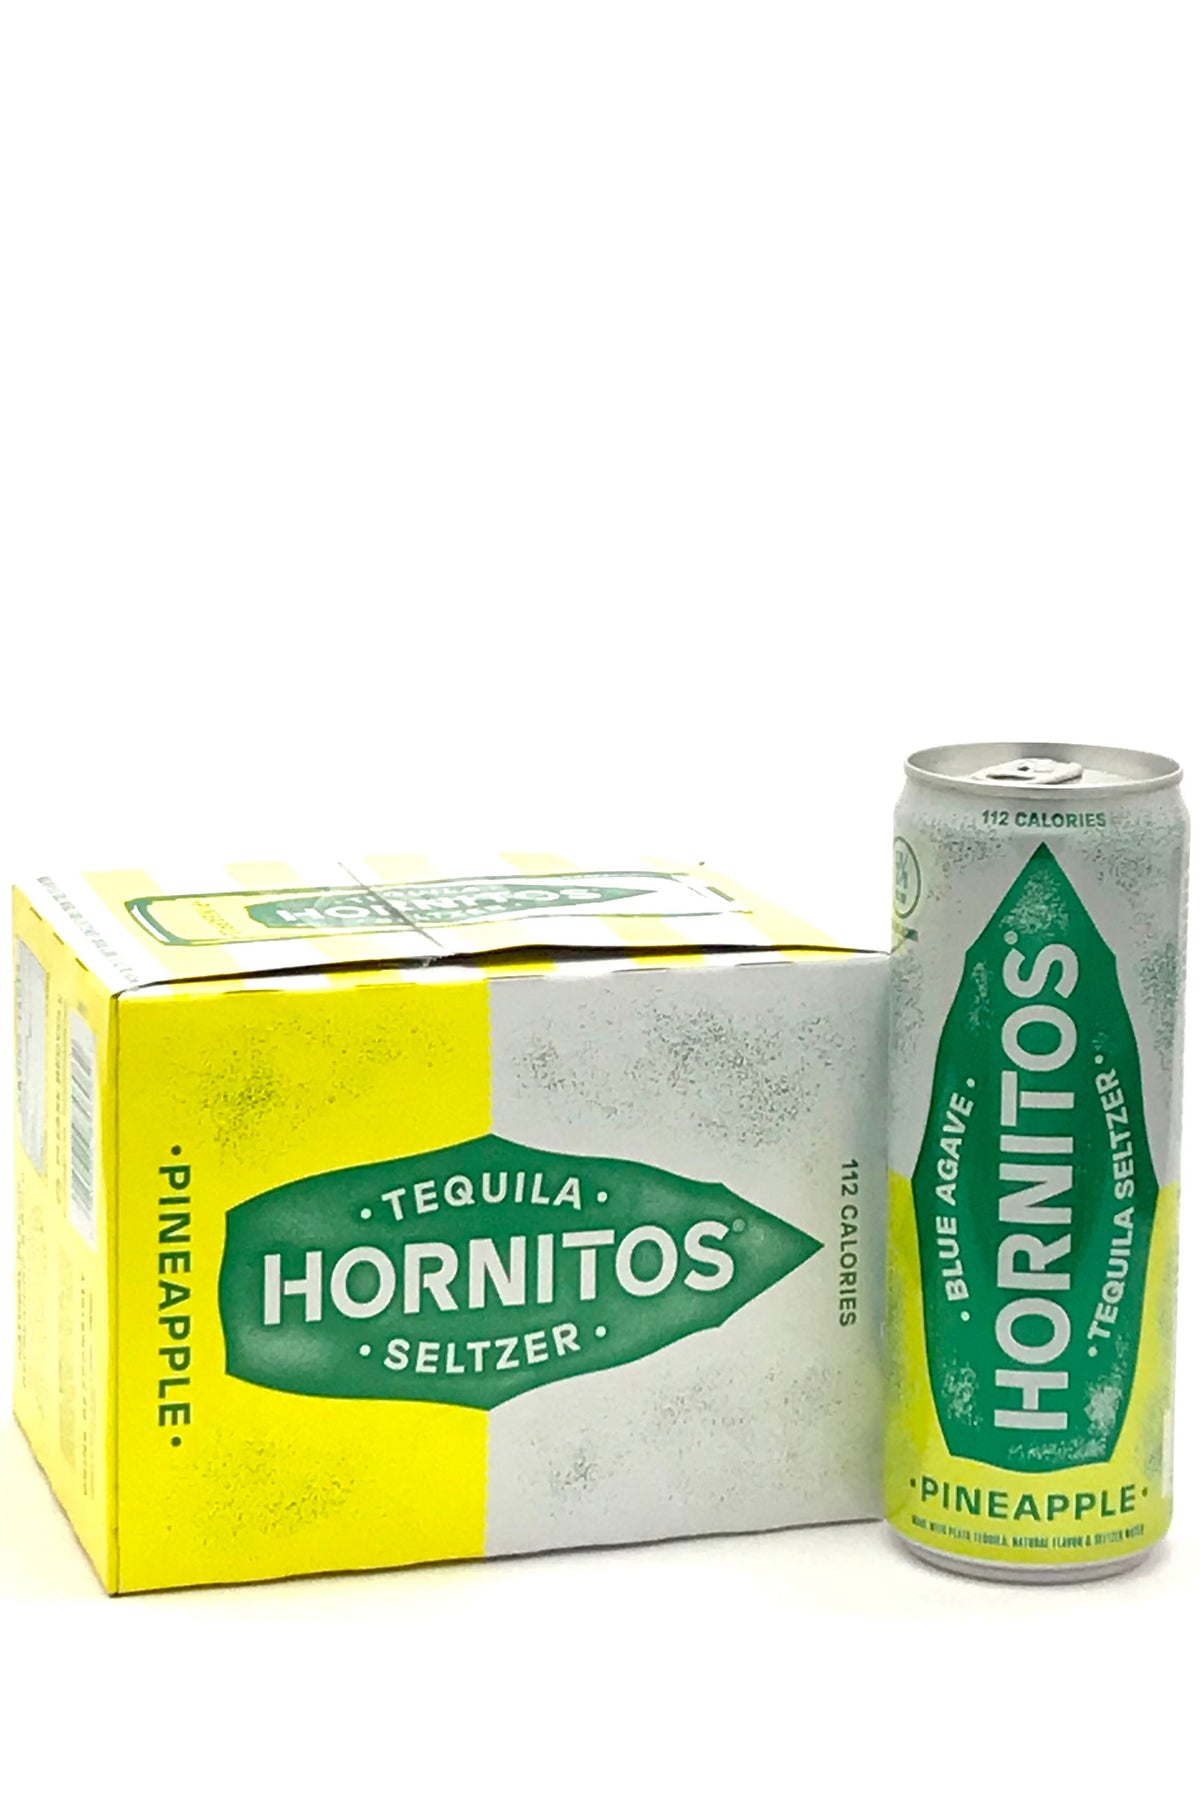 Hornitos Tequila Seltzer Pineapple RTD Cocktail 4 x 355 ml cans